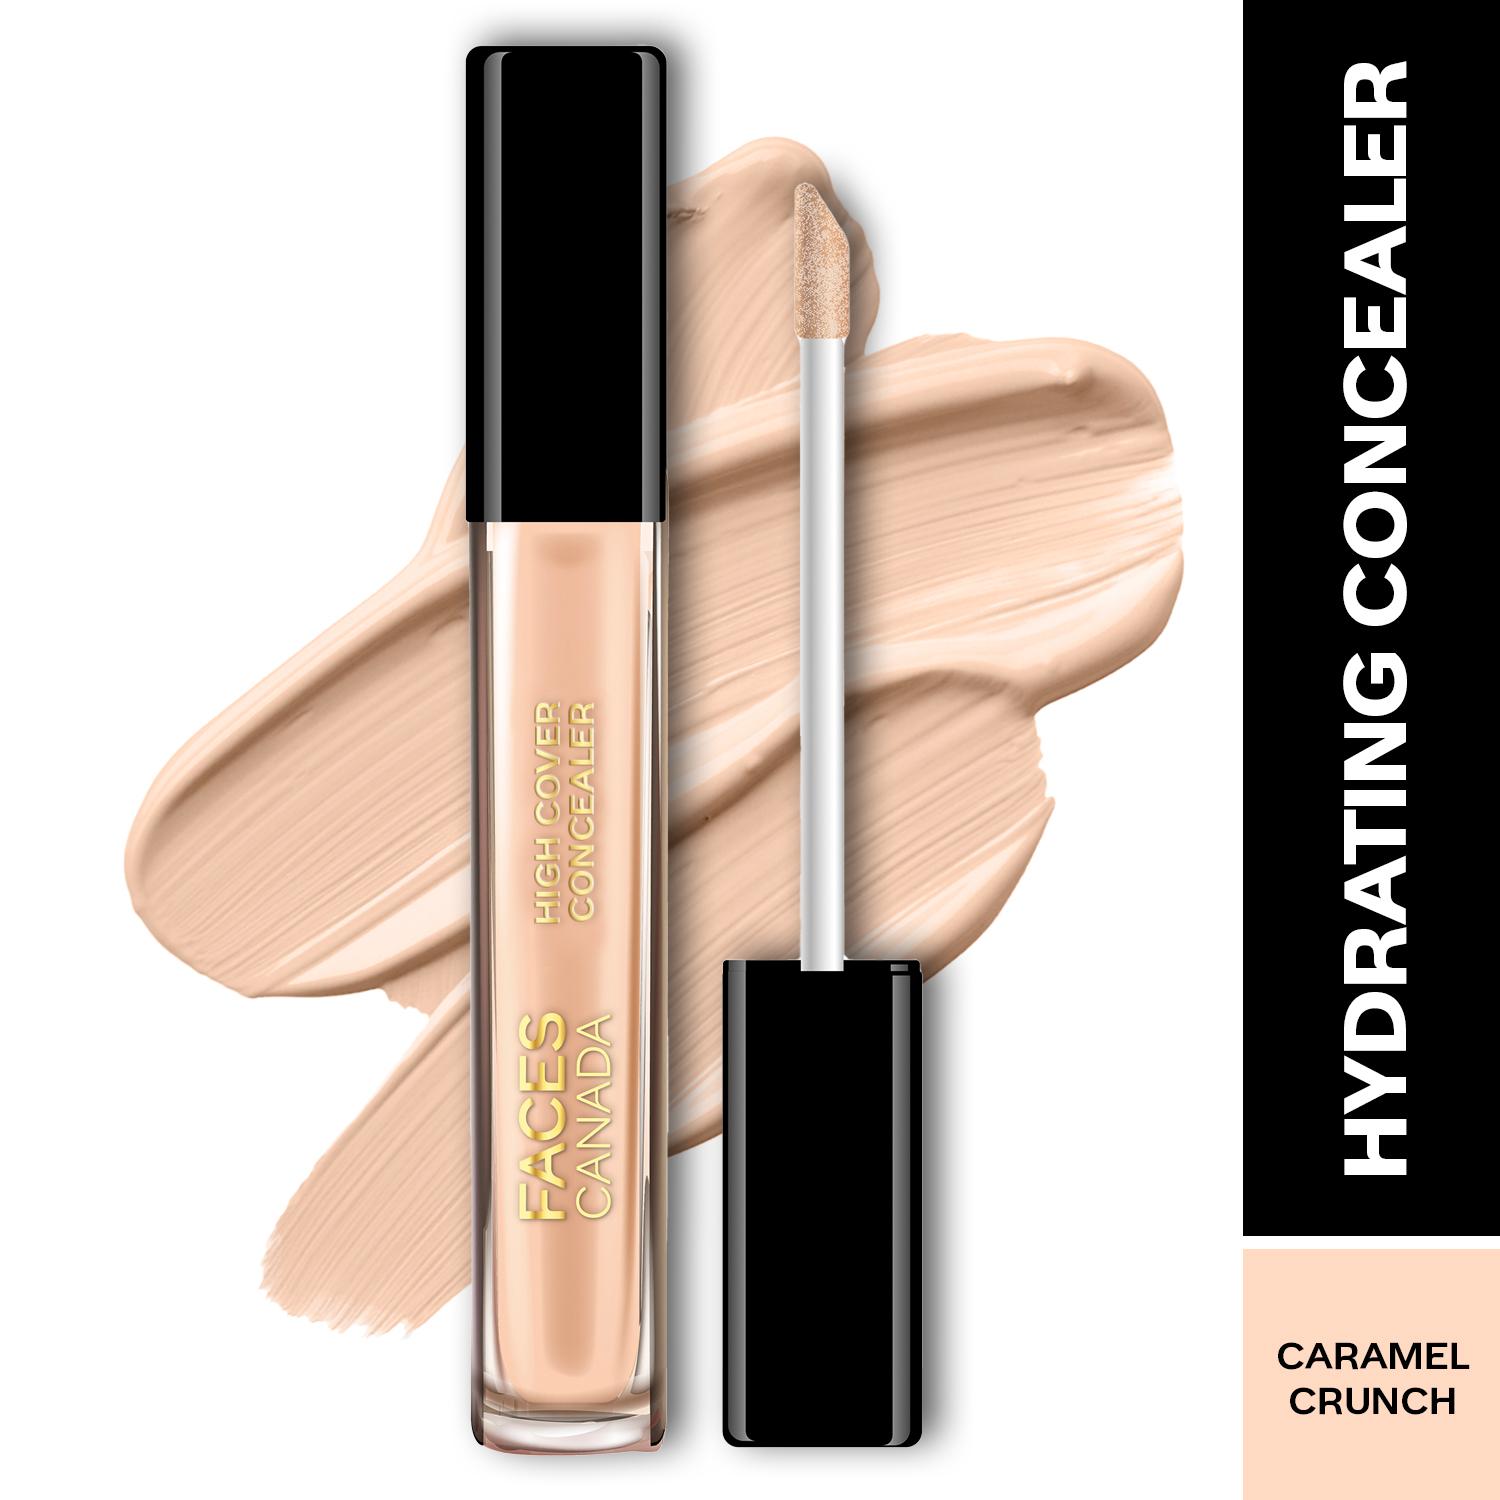 Faces Canada | Faces Canada High Cover Concealer - Caramel Crunch 03, Blends Easily, Natural Finish (4 ml)